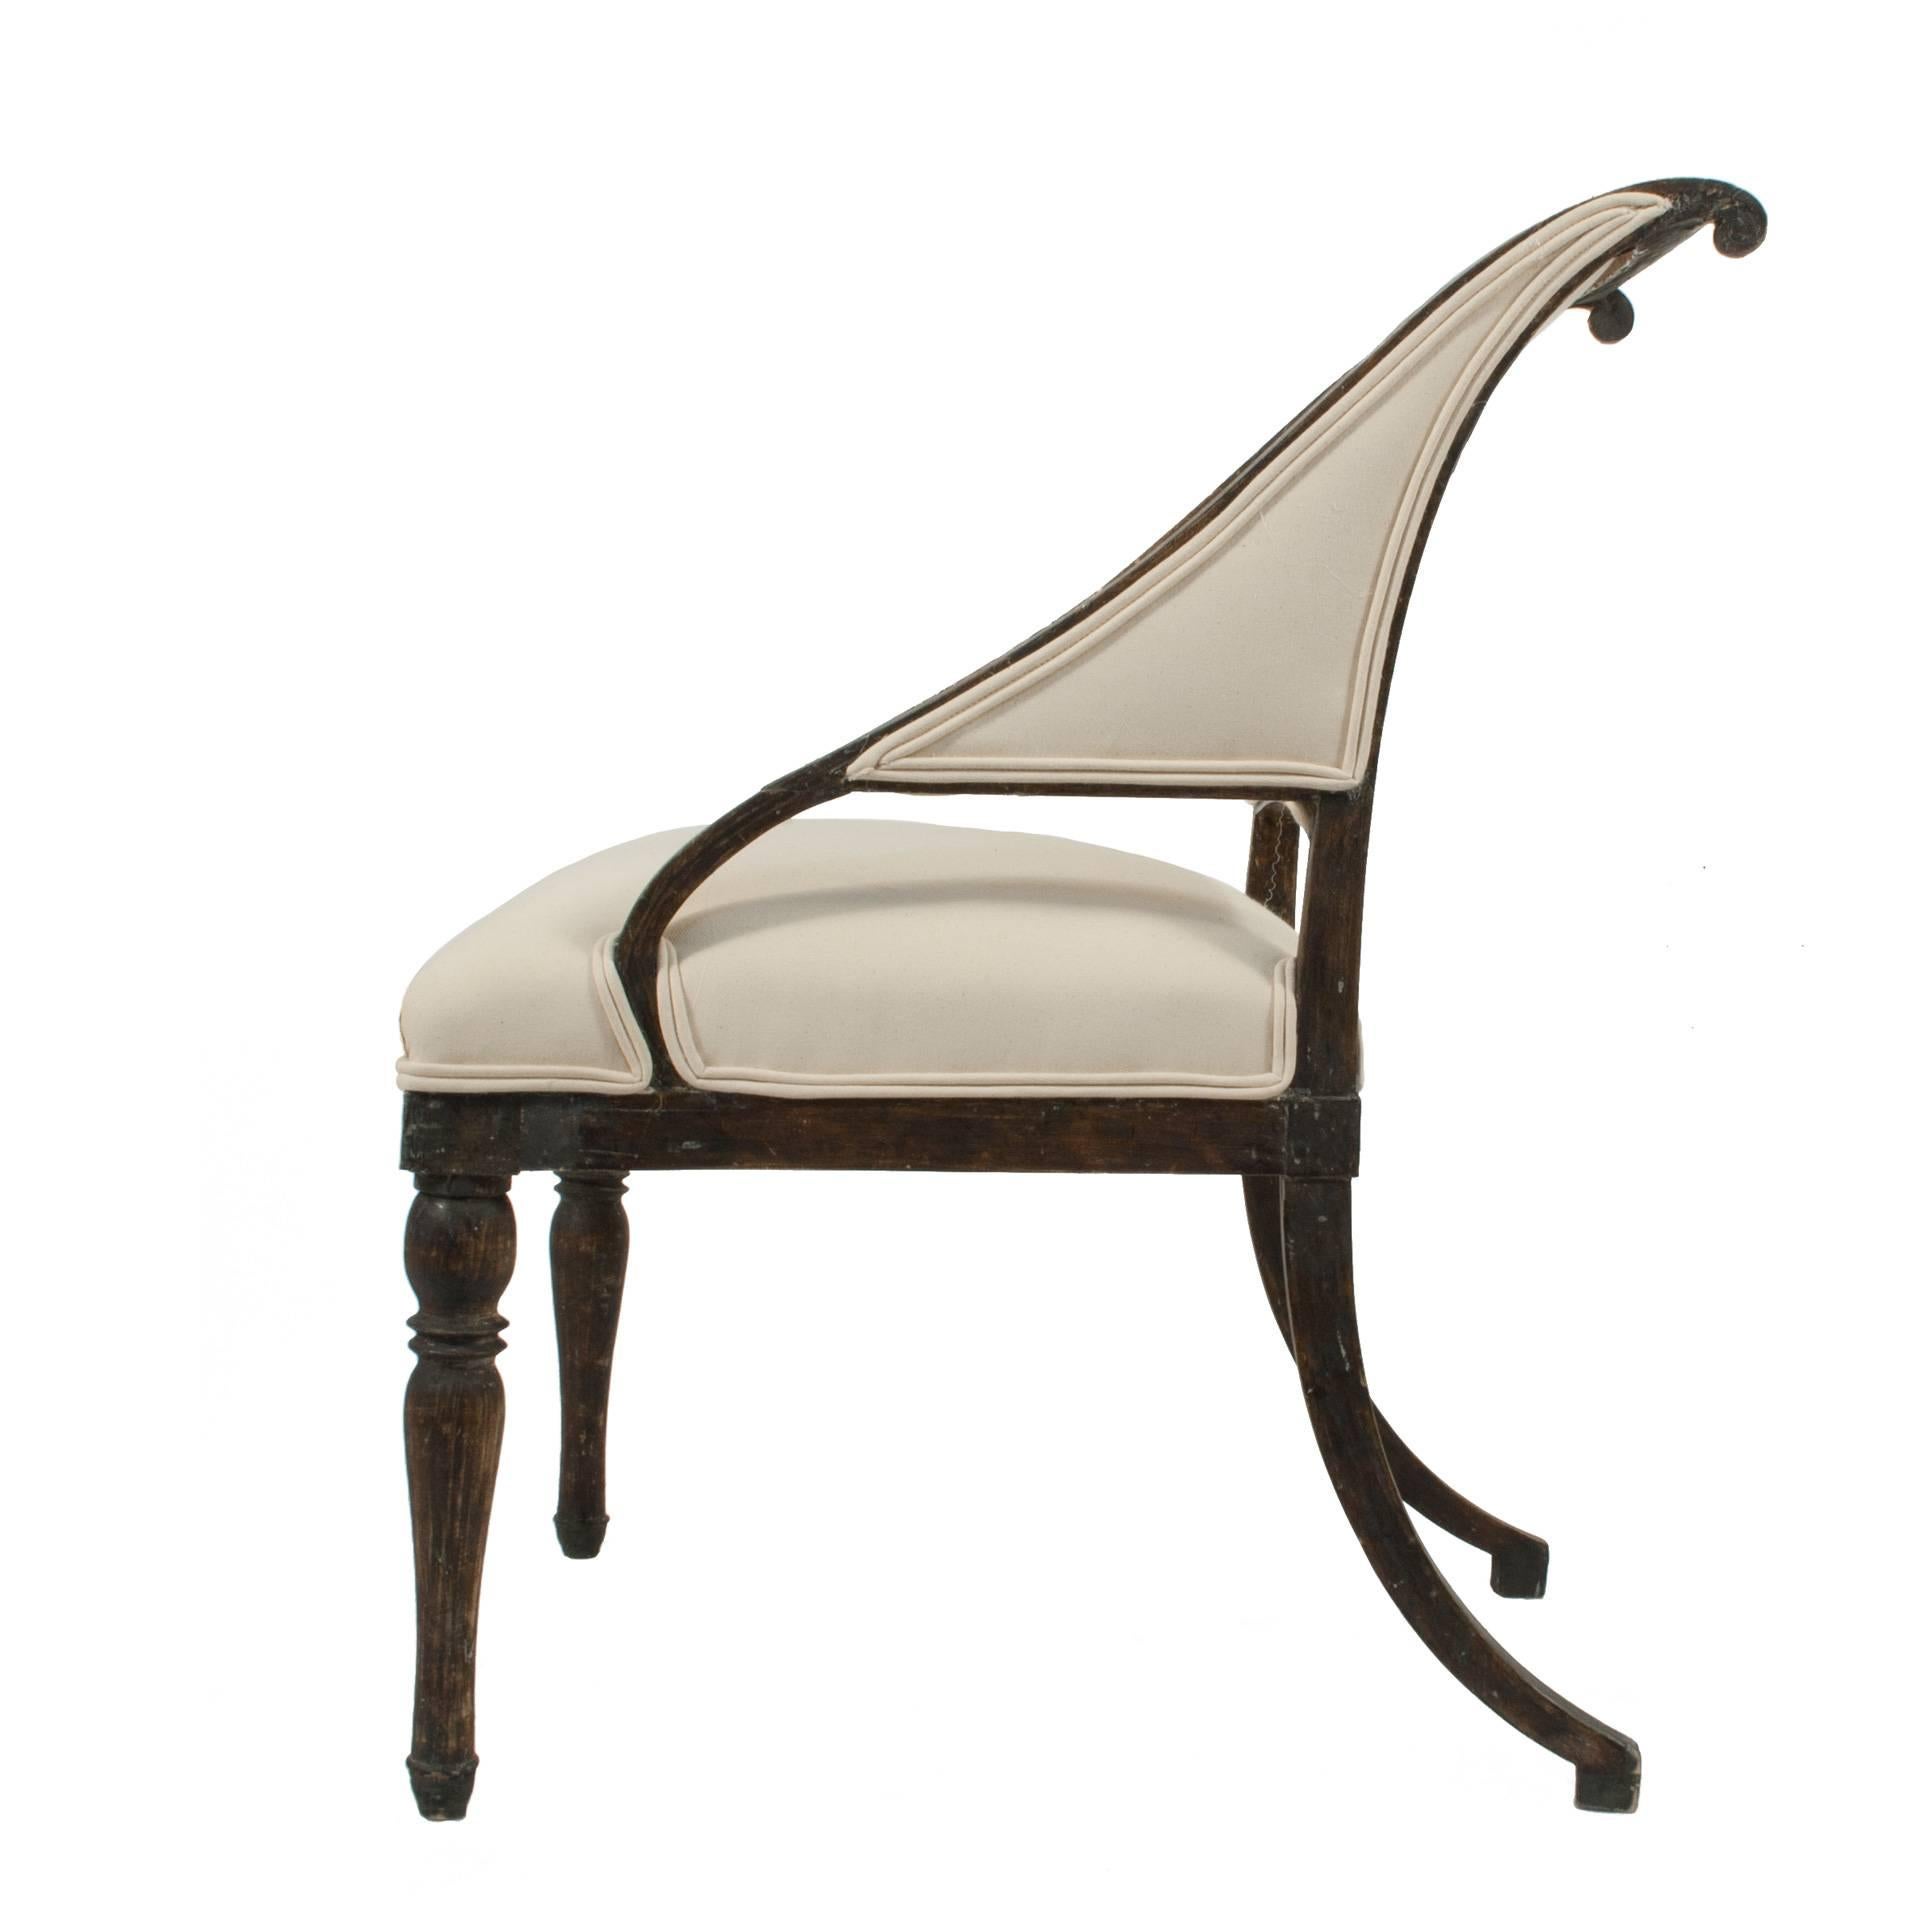 Gustavian lounge chair signed by Ephraim Stahl (1767-1820) in a worn black patina.